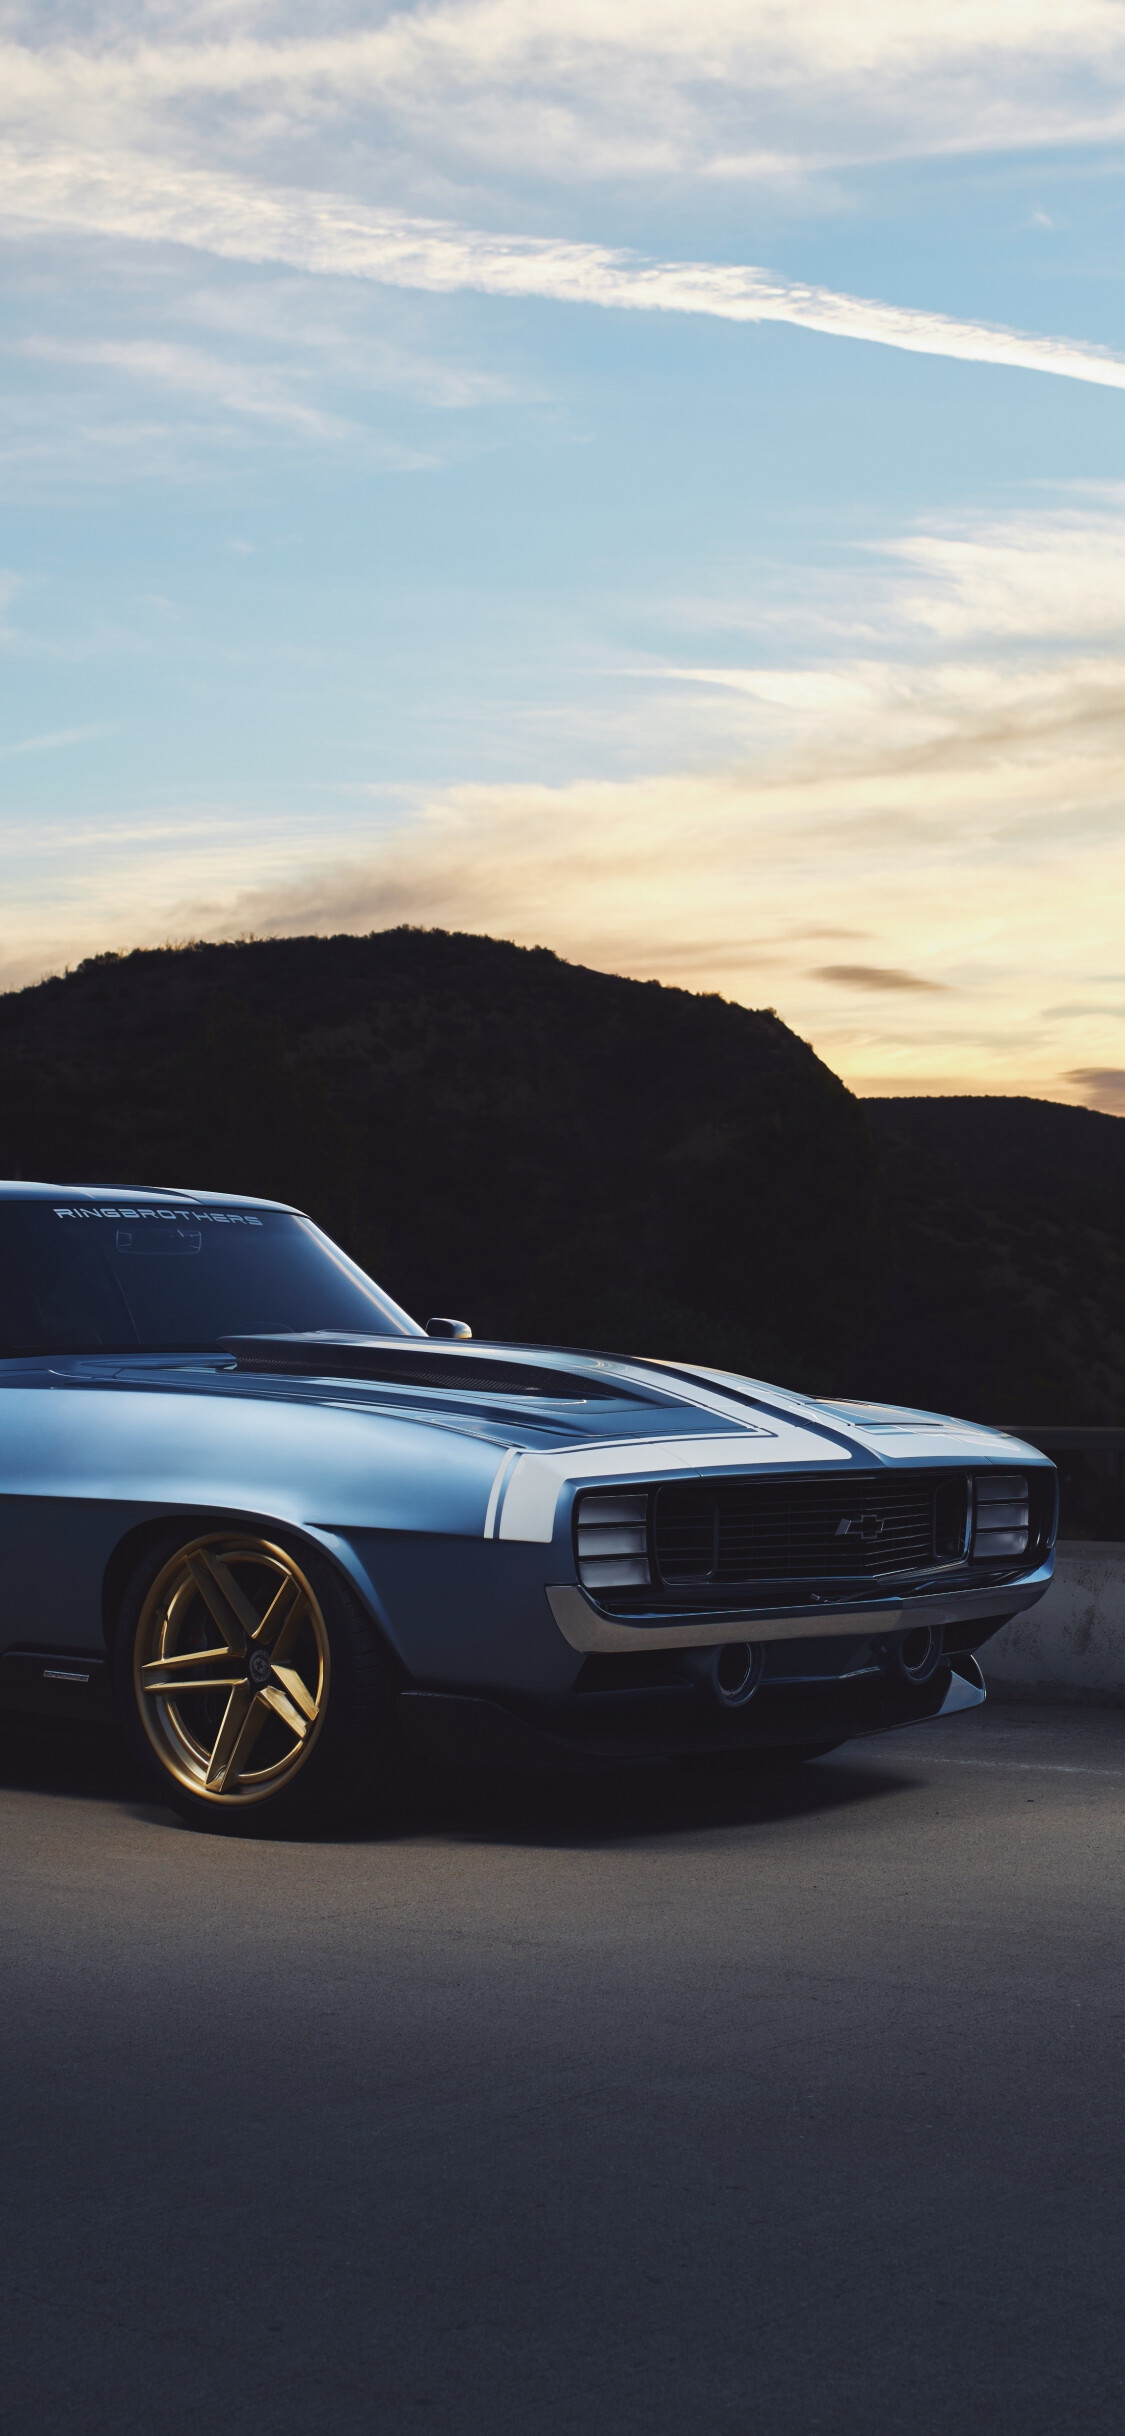 Chevrolet: 1969 Chevy Camaro G-code, Muscle car, Ringbrothers. 1130x2440 HD Wallpaper.